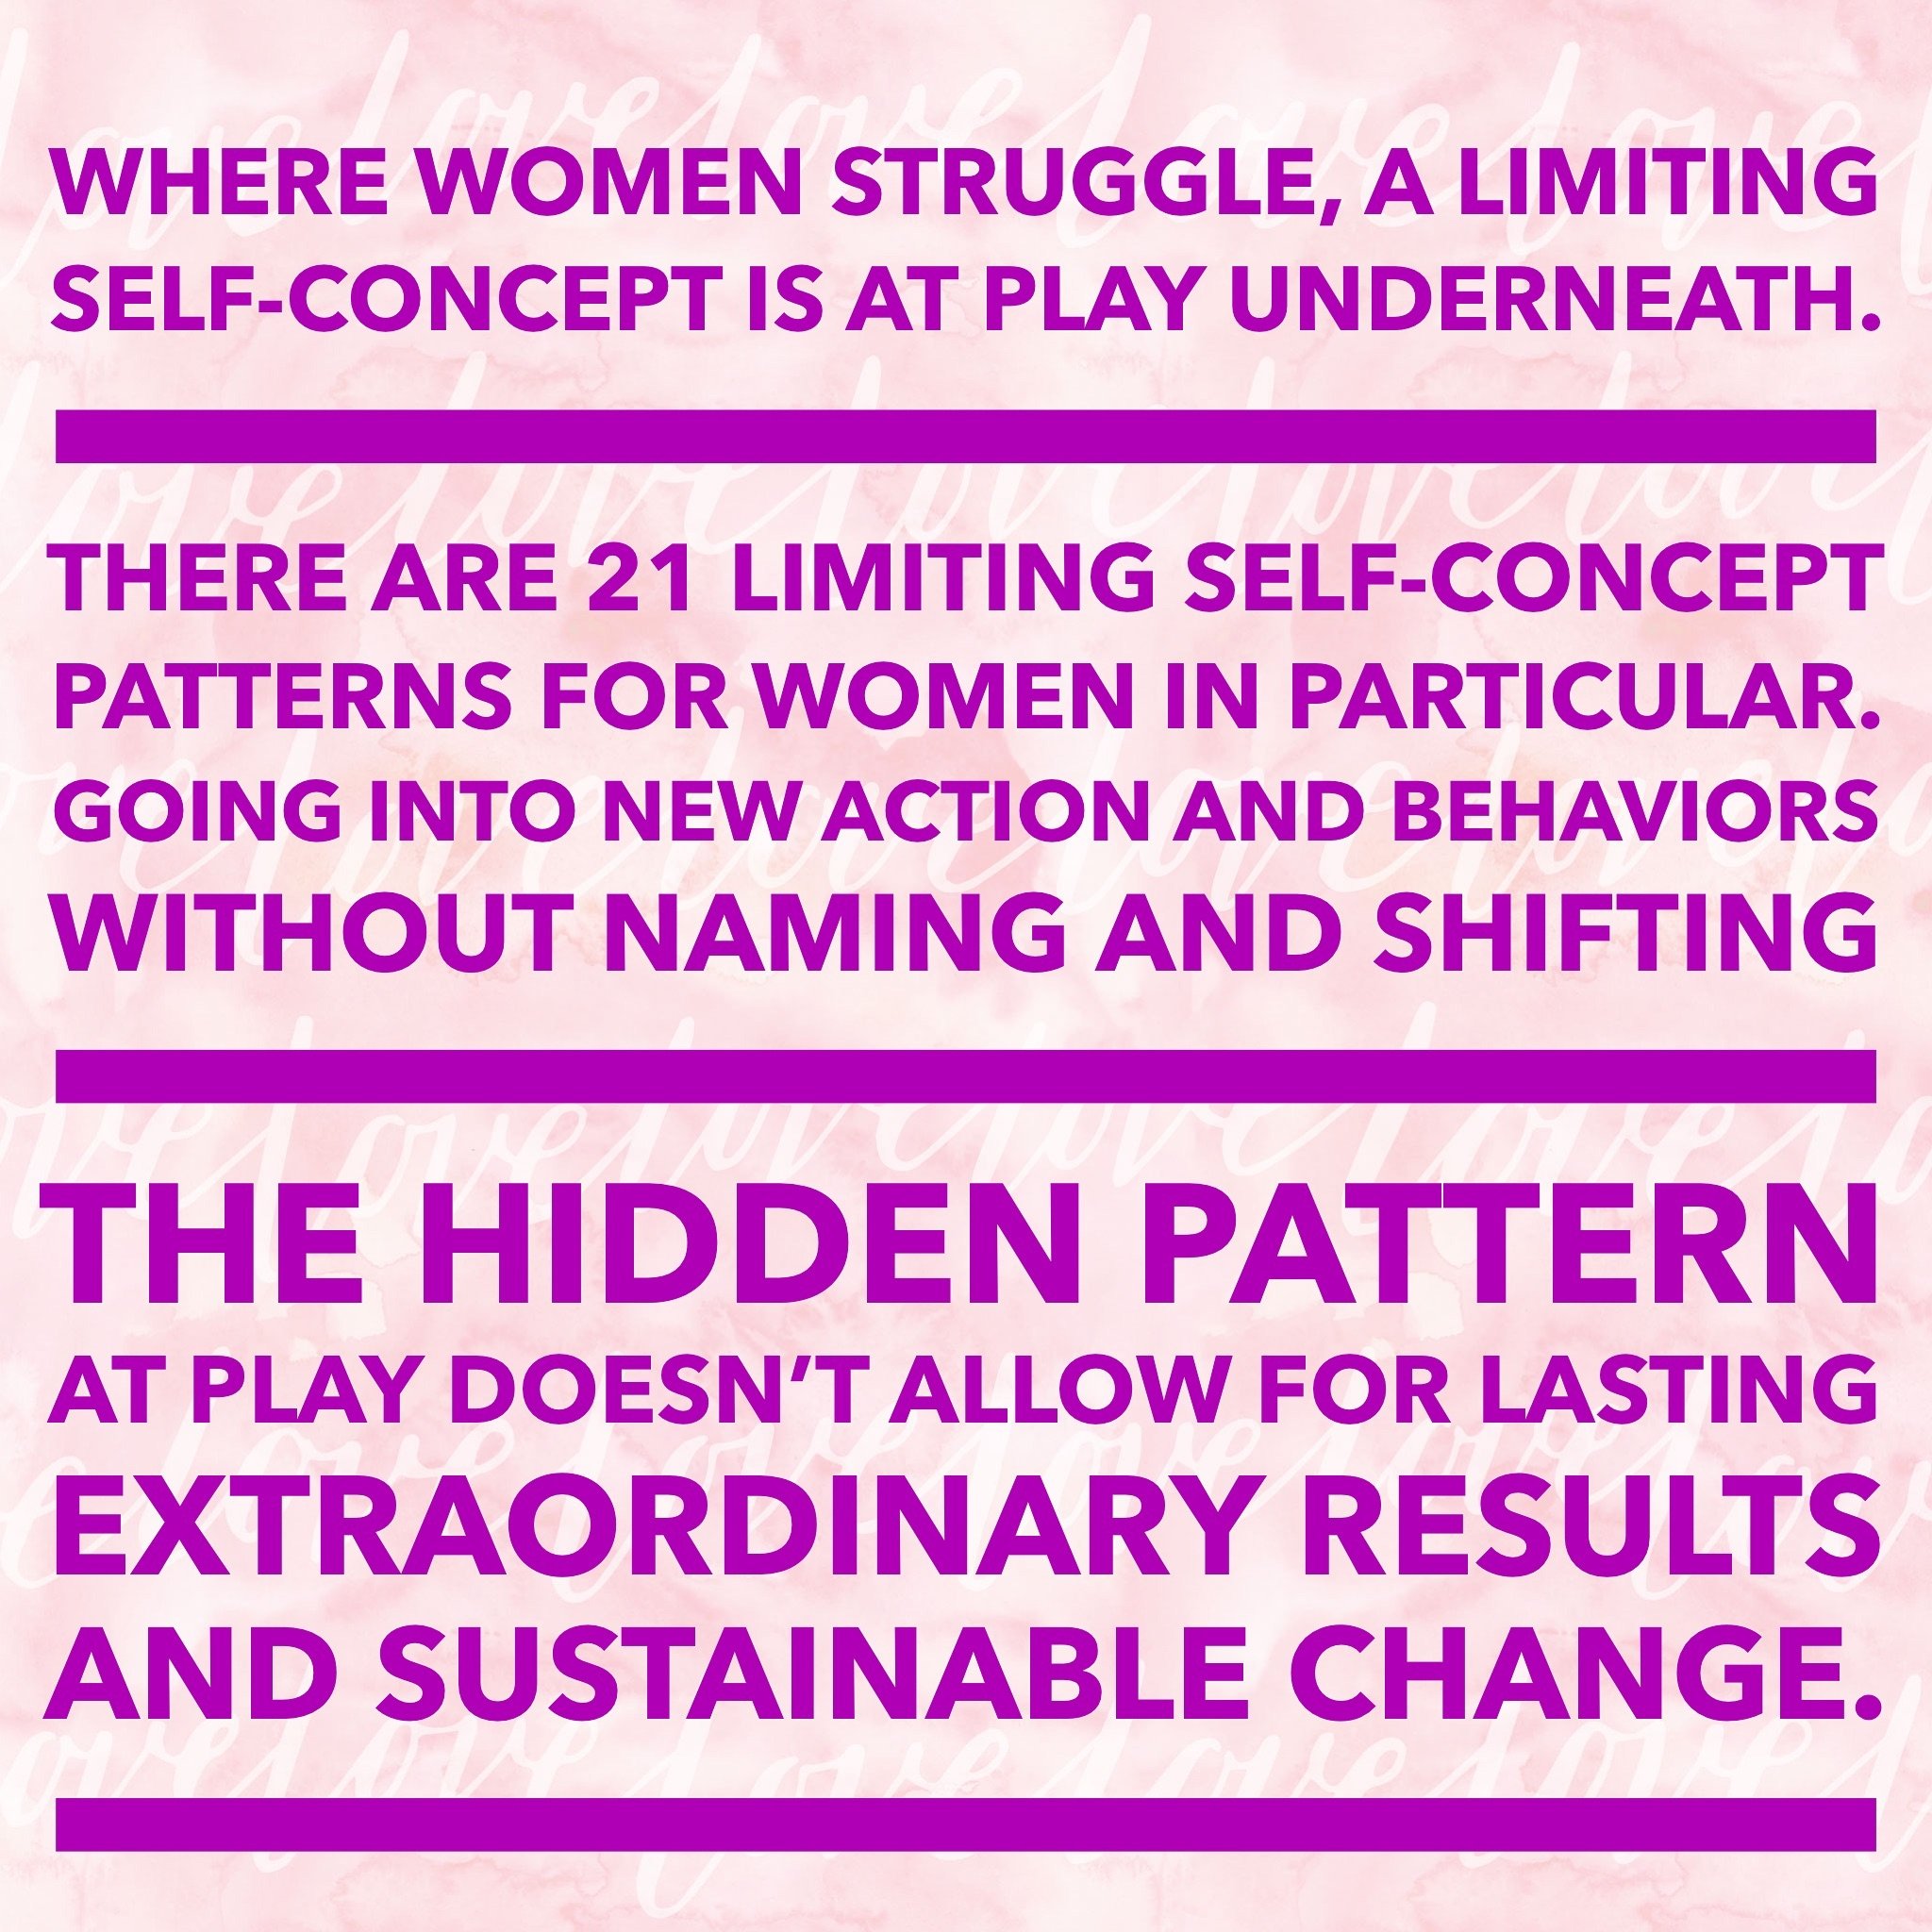 This is not simply a mindset shift but a somatic shift too! 💃
Being informed by these 21 patterns as a health practitioner and coach and supporting a woman to lovingly and powerfully transform the inner hidden pattern that is the barrier to her grow